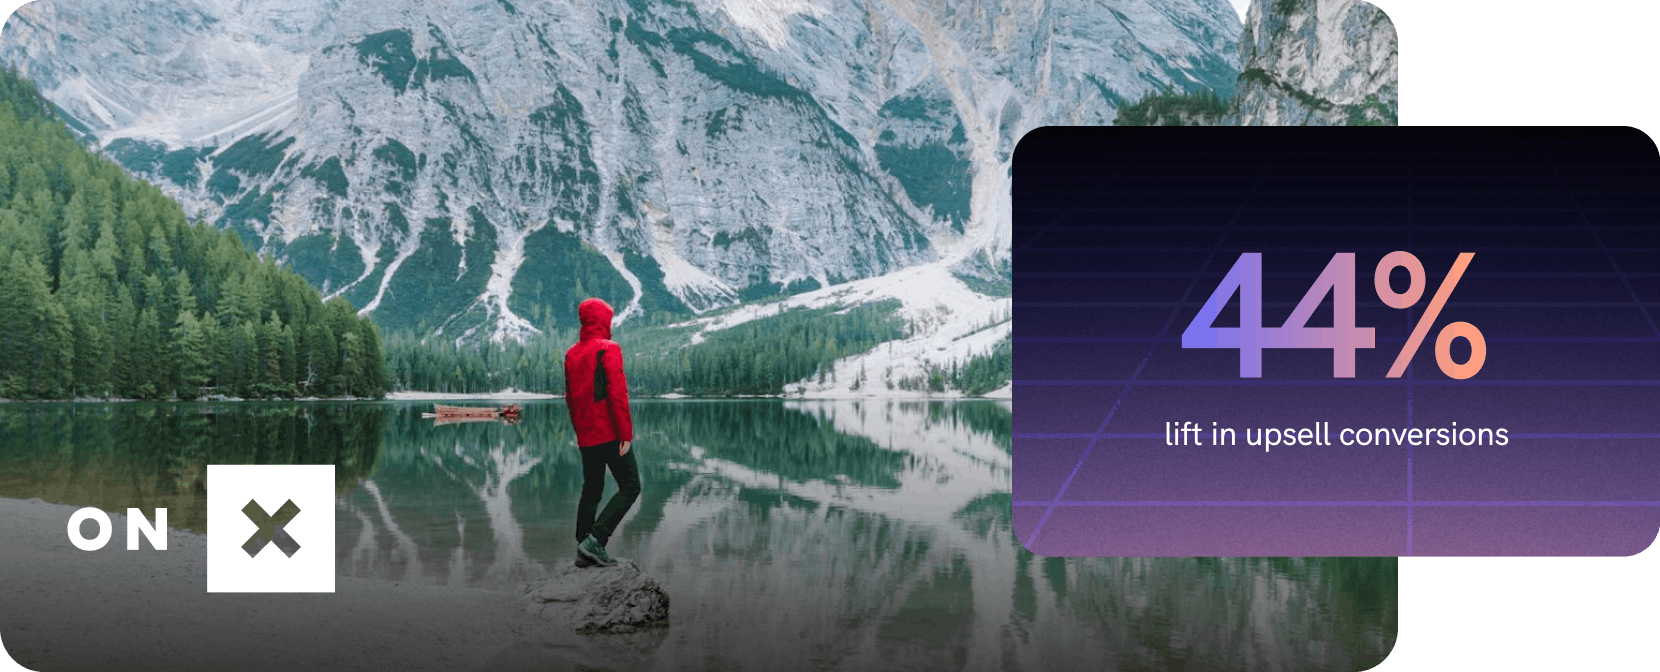 A stock image of someone hiking with the onX logo and a stat from mParticle